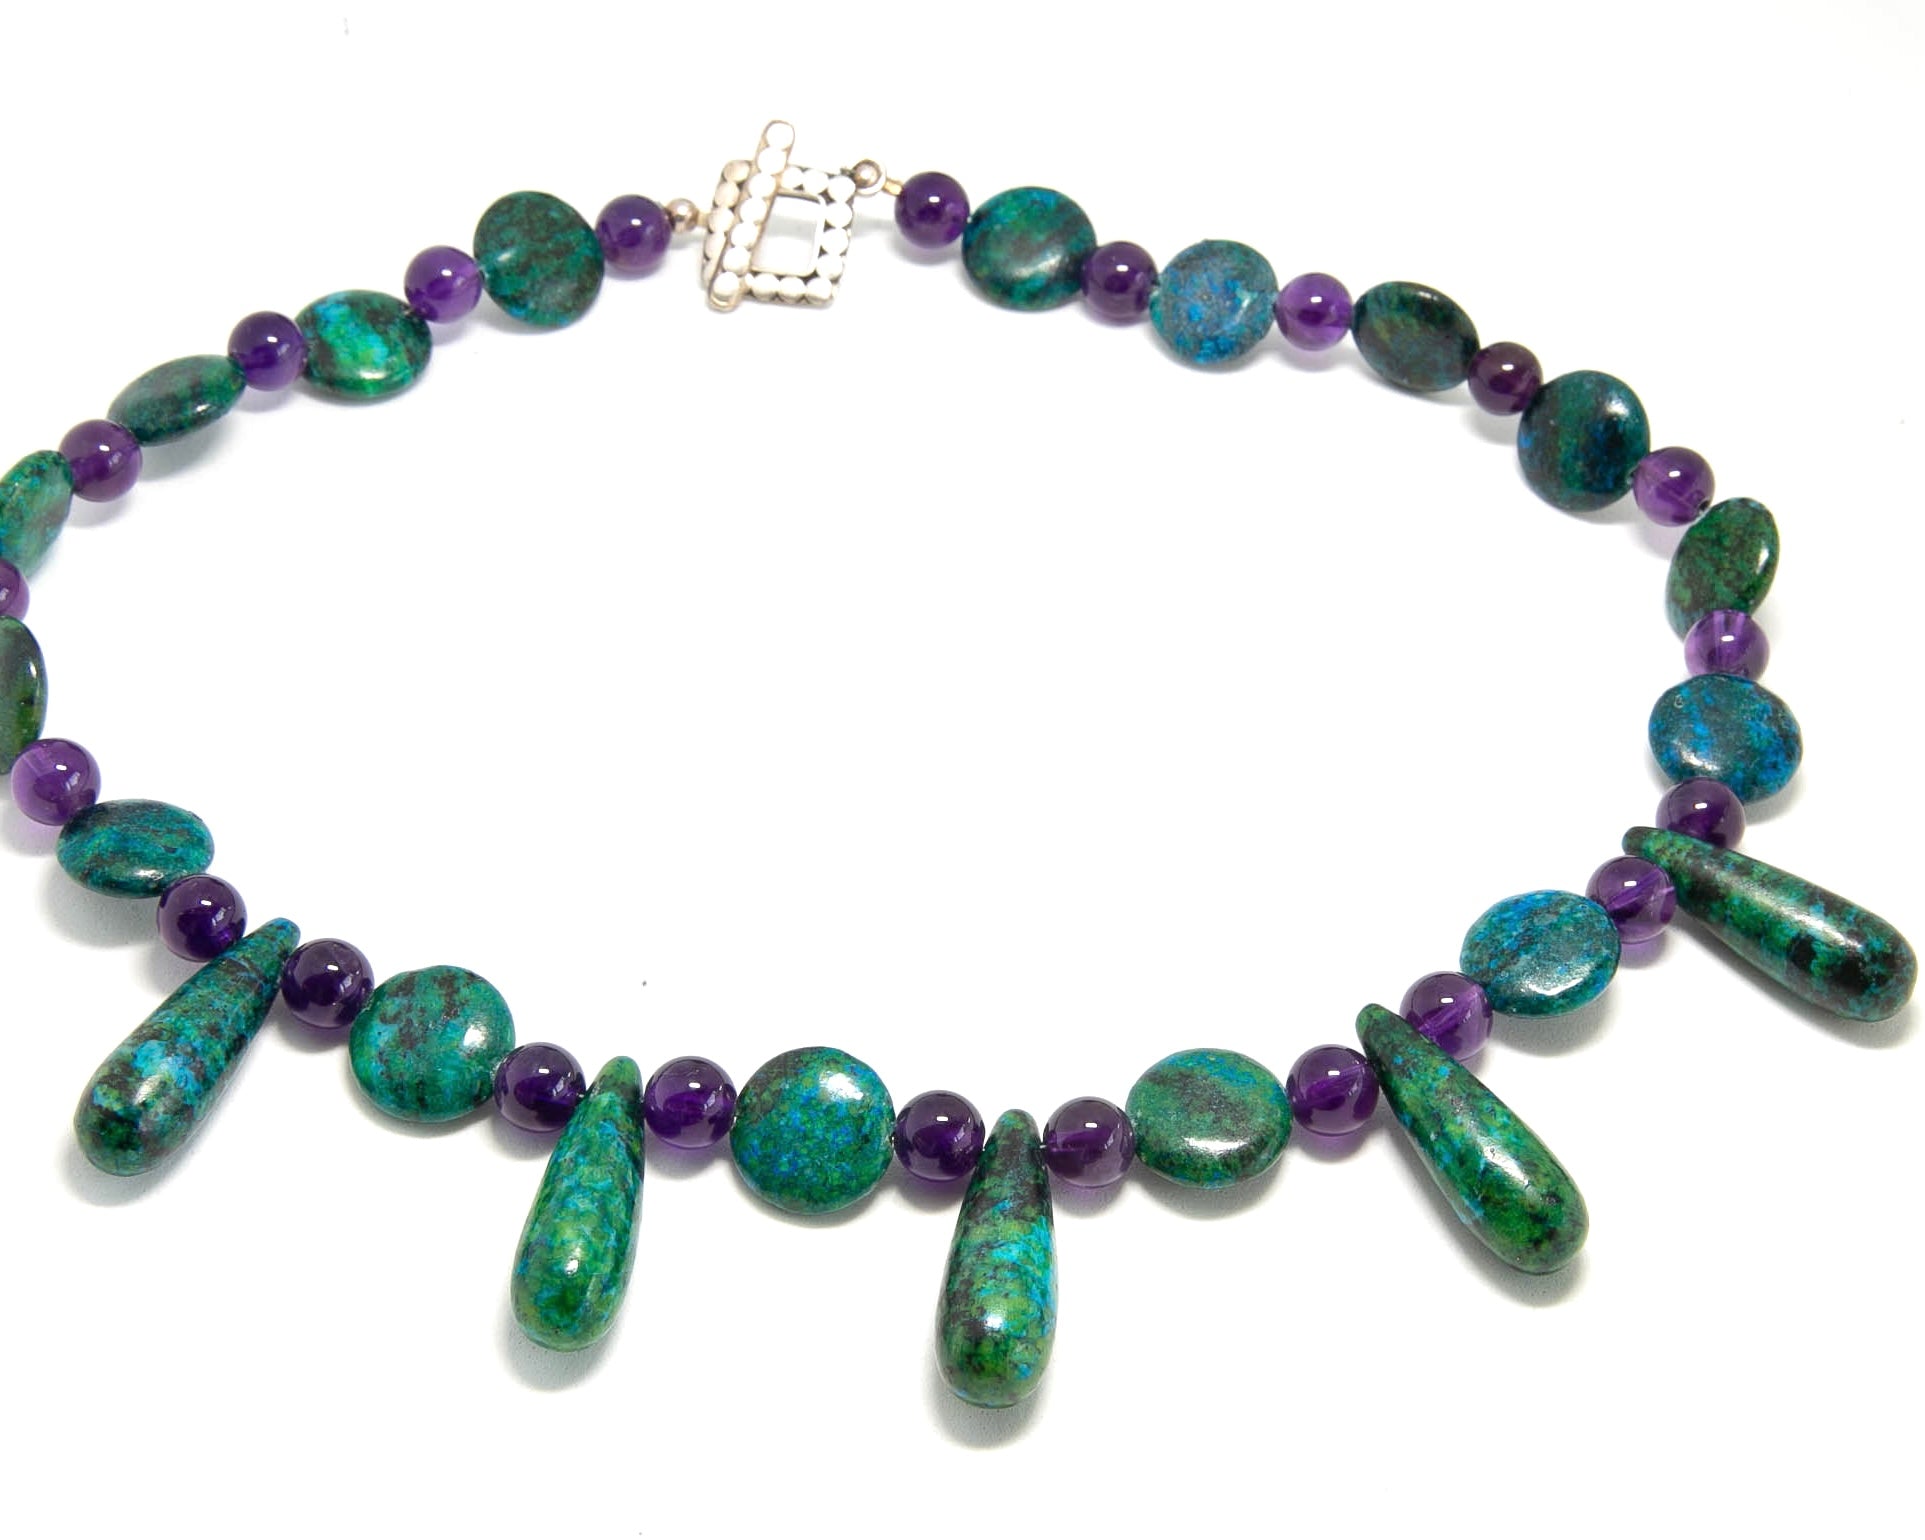 Amethyst and Chrysophase necklace with sterling silver toggle clasp